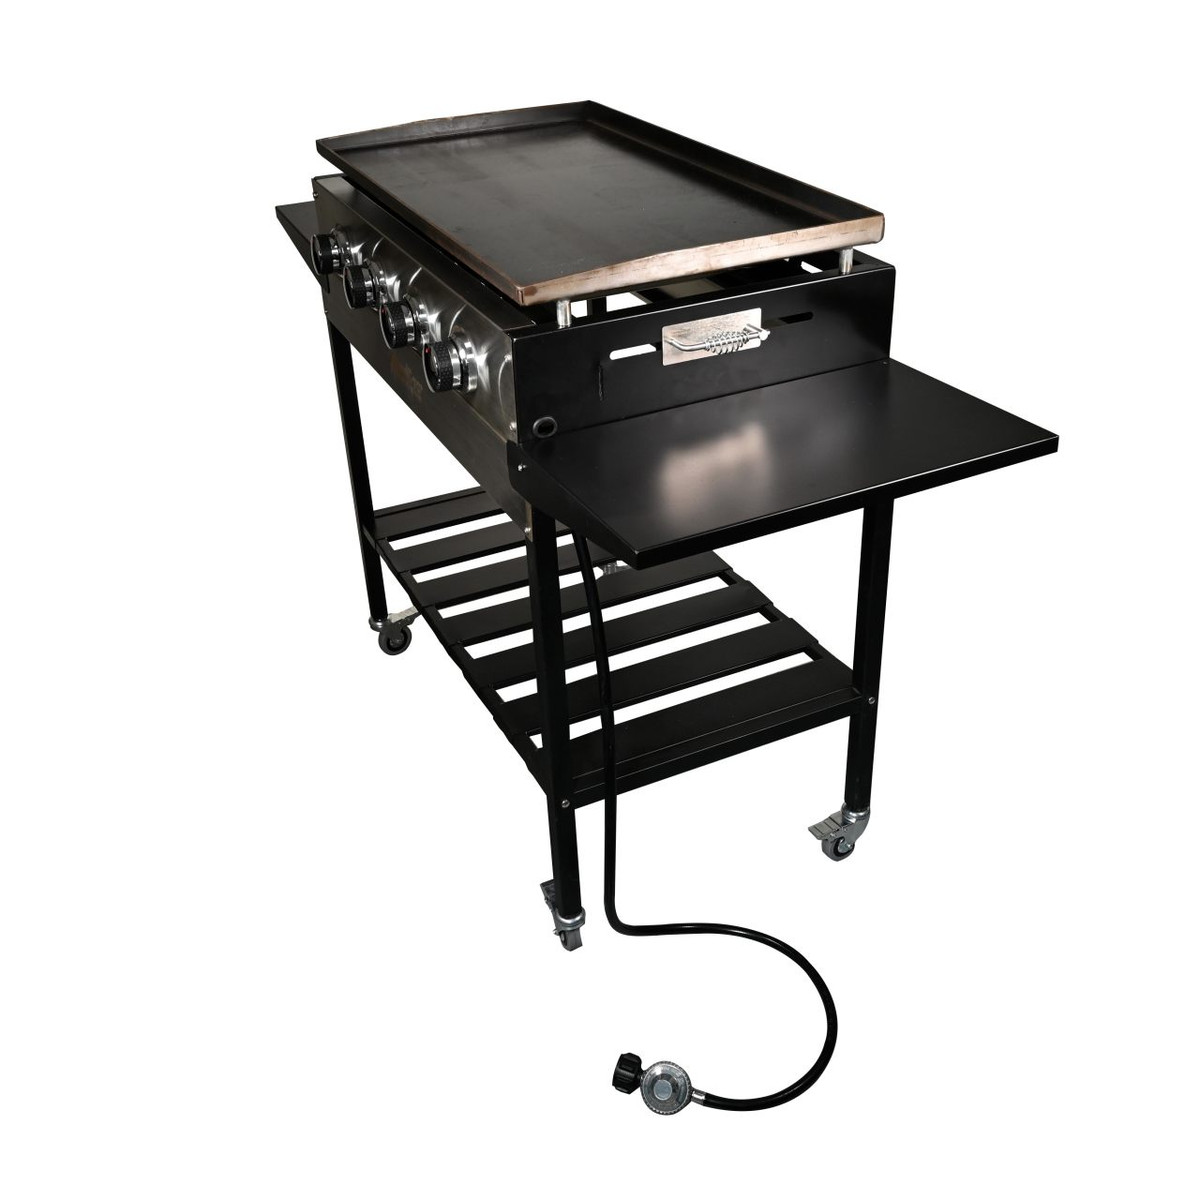 WoodEze 4-Burner Flat Top Griddle GAS Grill - Black and Stainless Steel